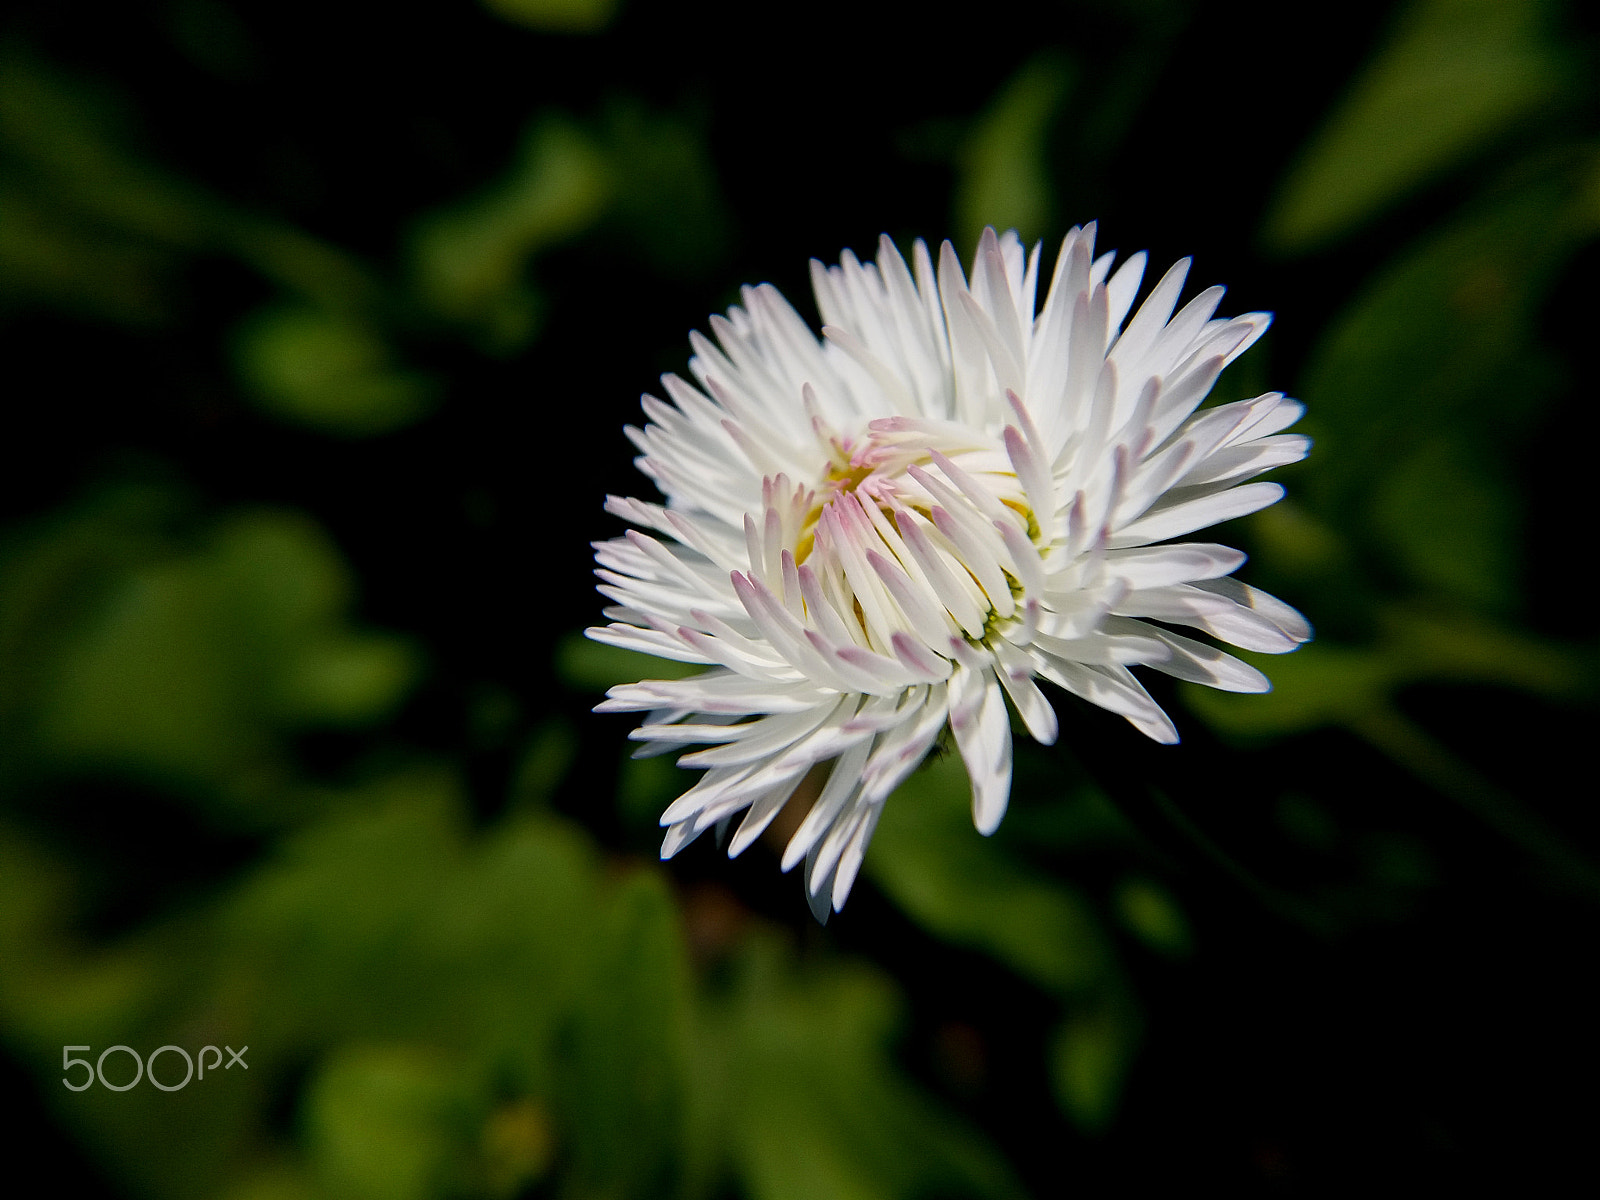 Samsung Galaxy A9 Pro sample photo. White daisy flower beauty morning time photography